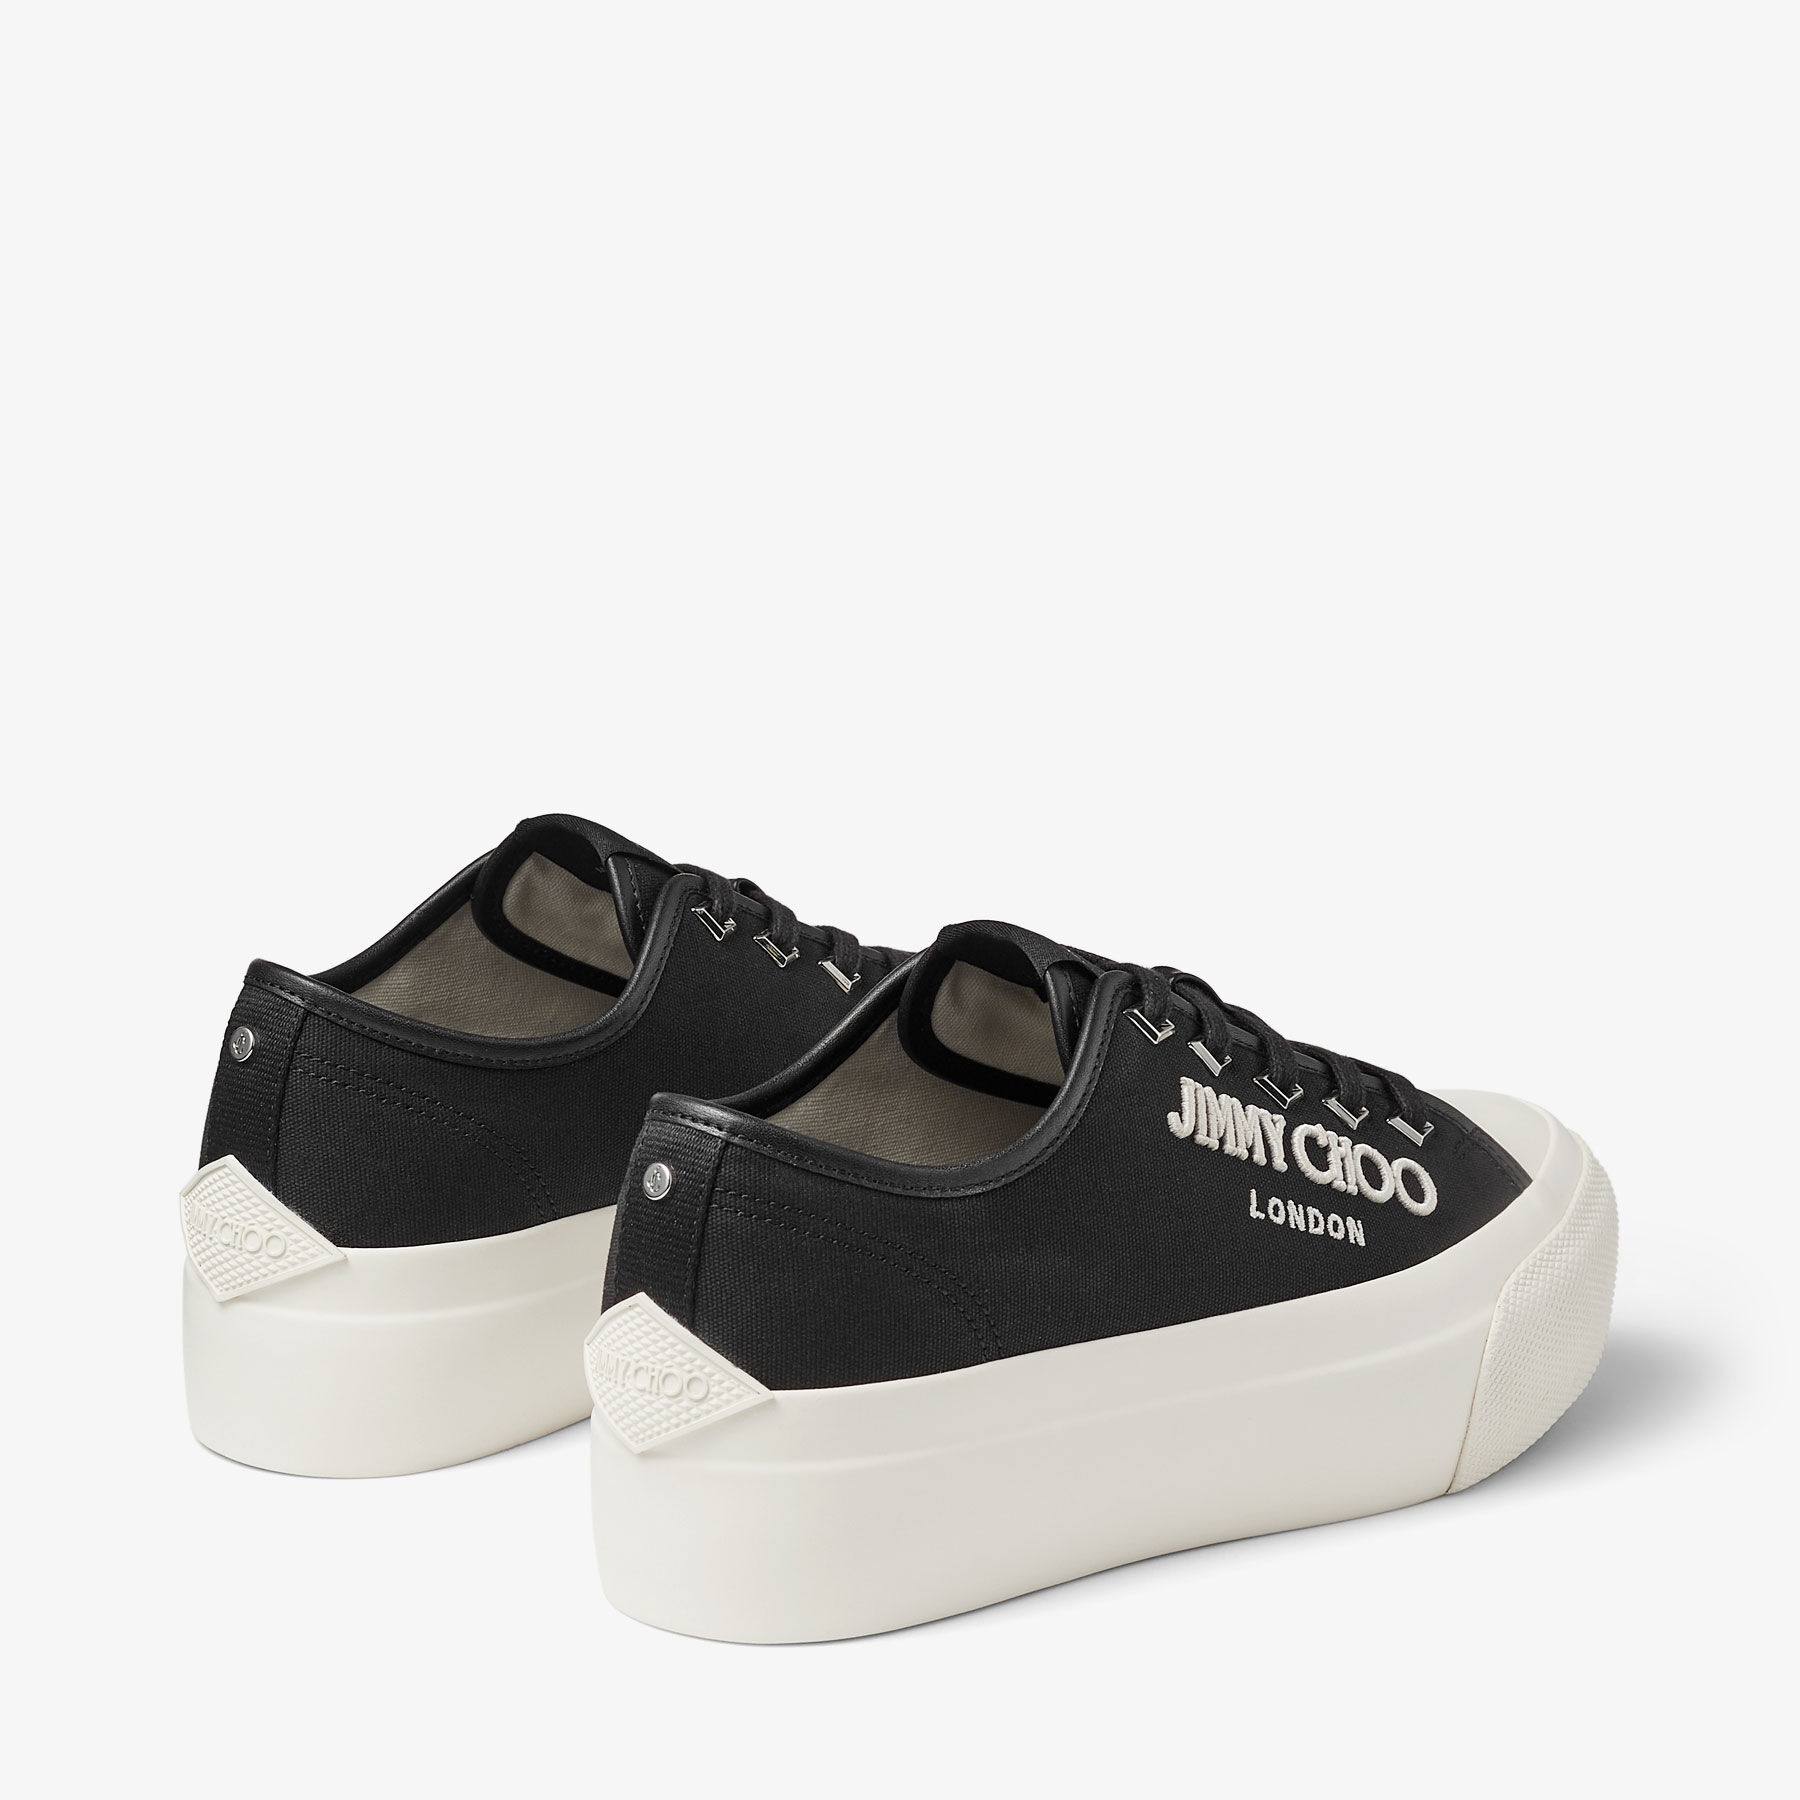 Palma Maxi/F
Black and Latte Canvas Platform Trainers with Embroidered Logo - 6